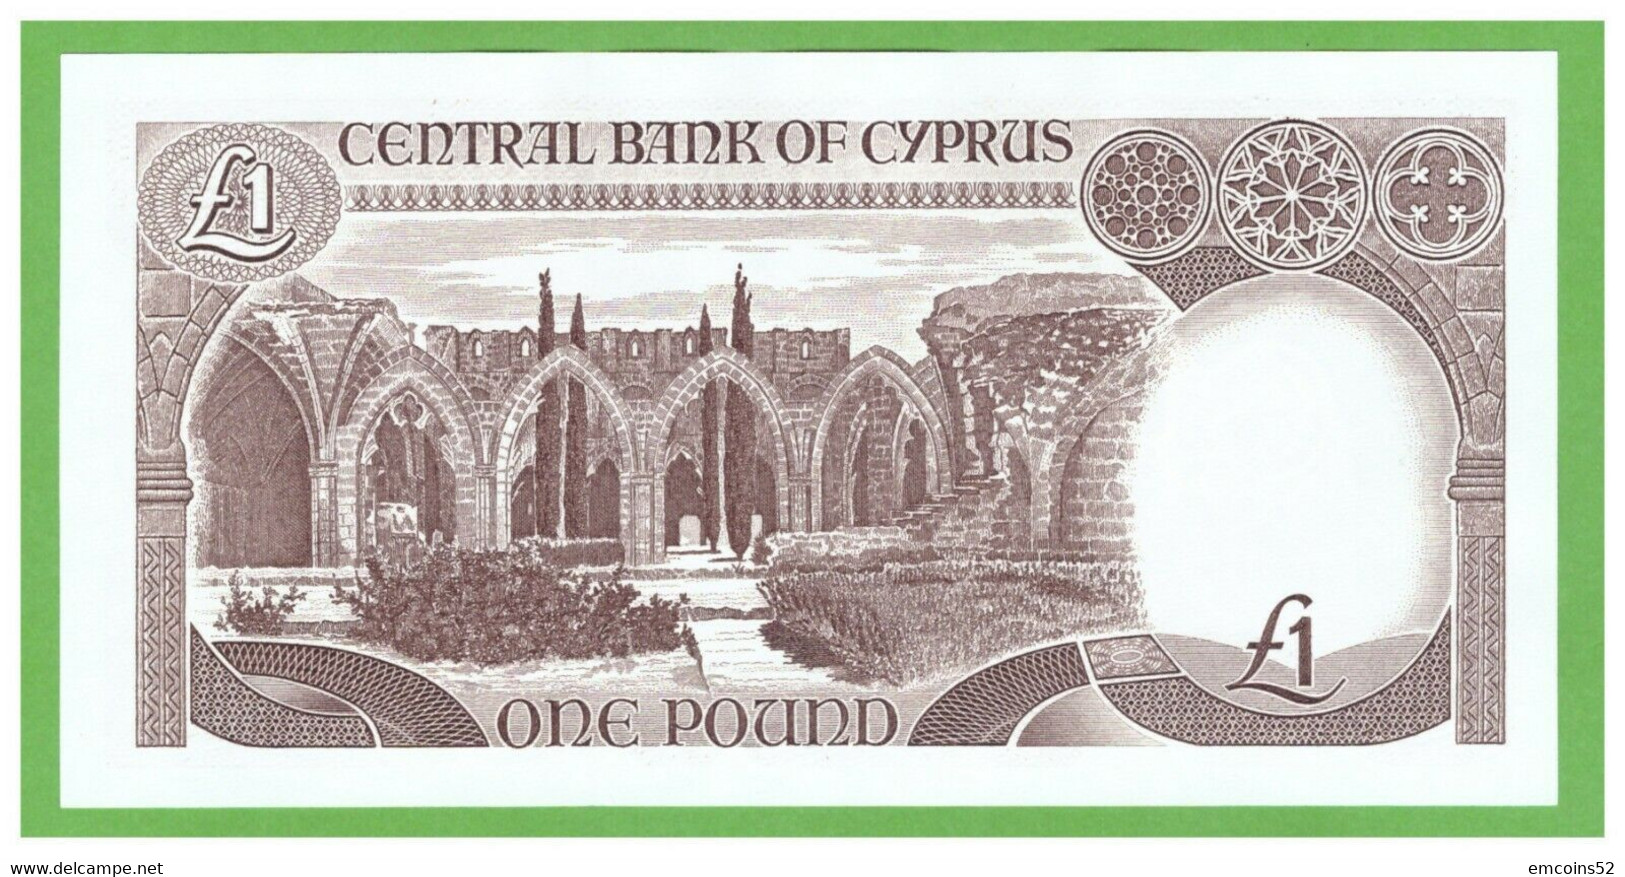 CYPRUS 1 POUND 1988  P-53a UNC  REPLACEMENT Z - Cyprus